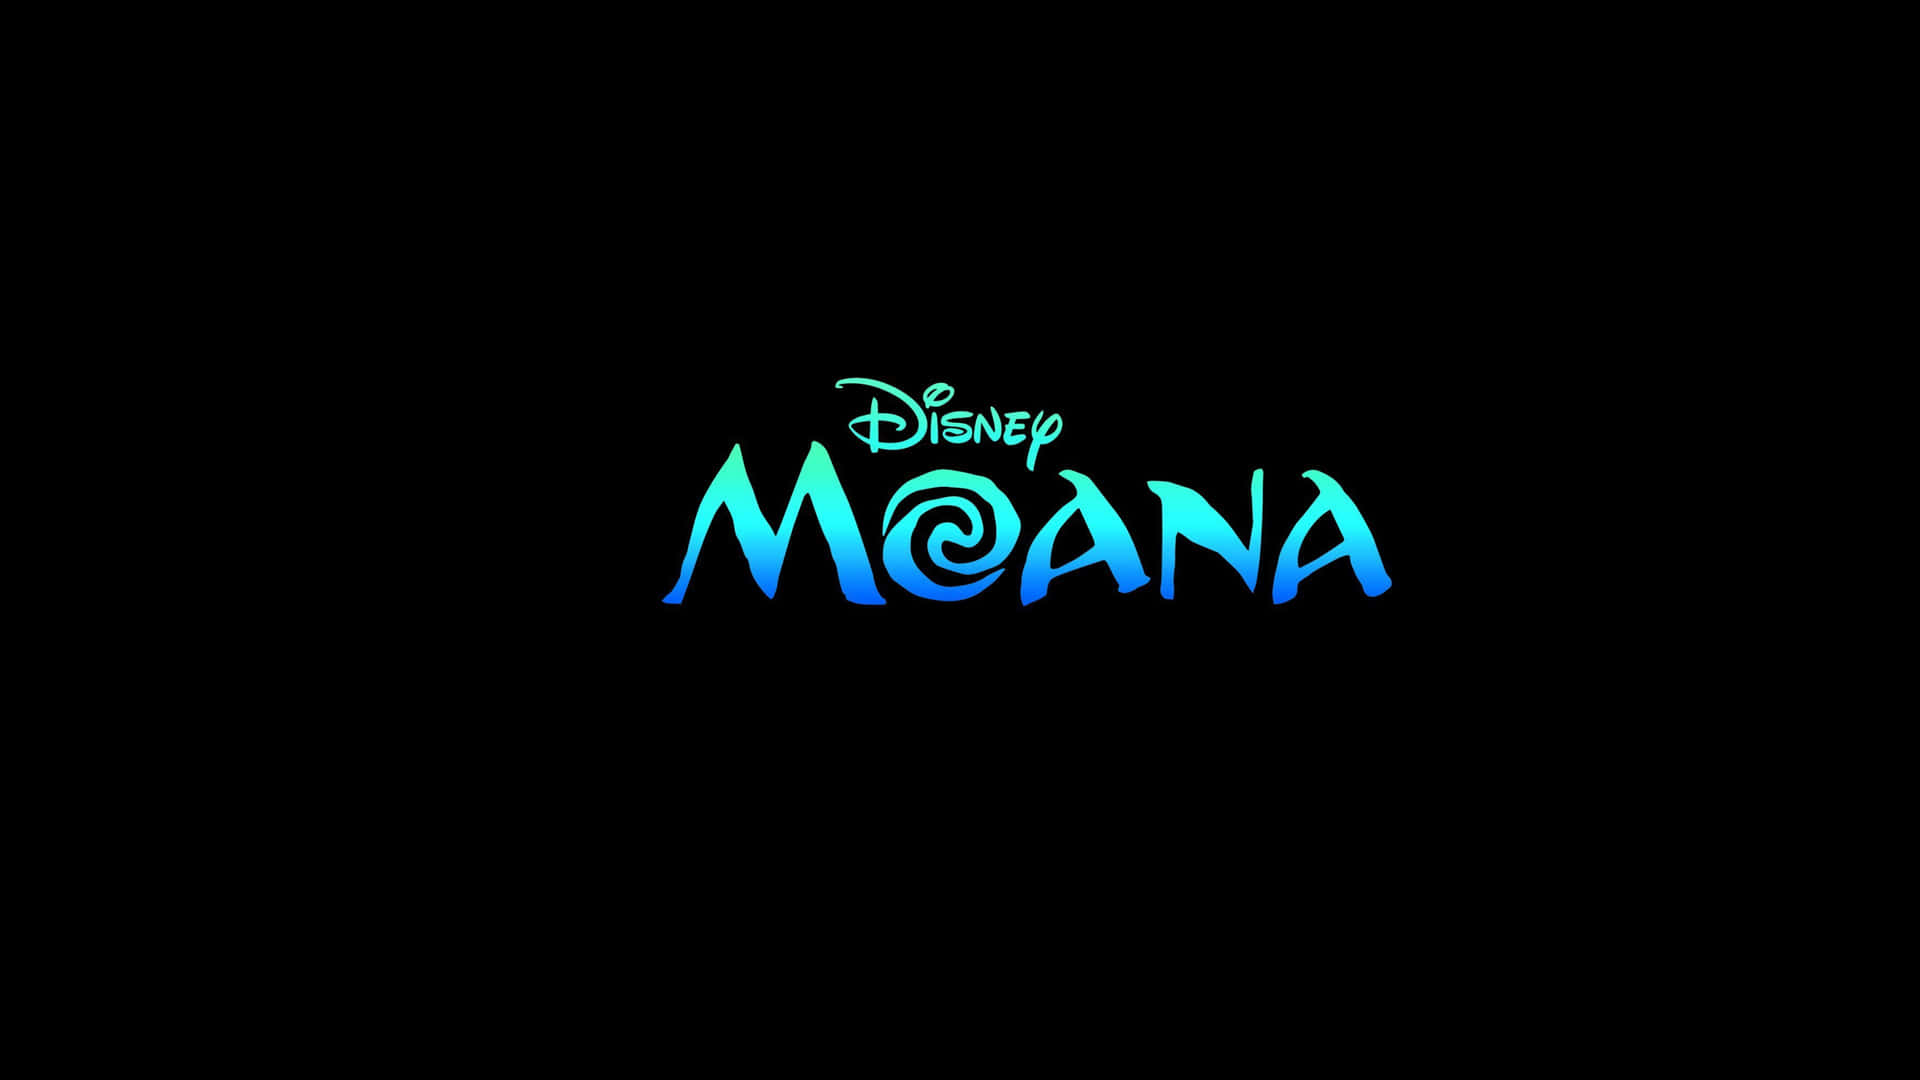 Moana embarks on a great adventure